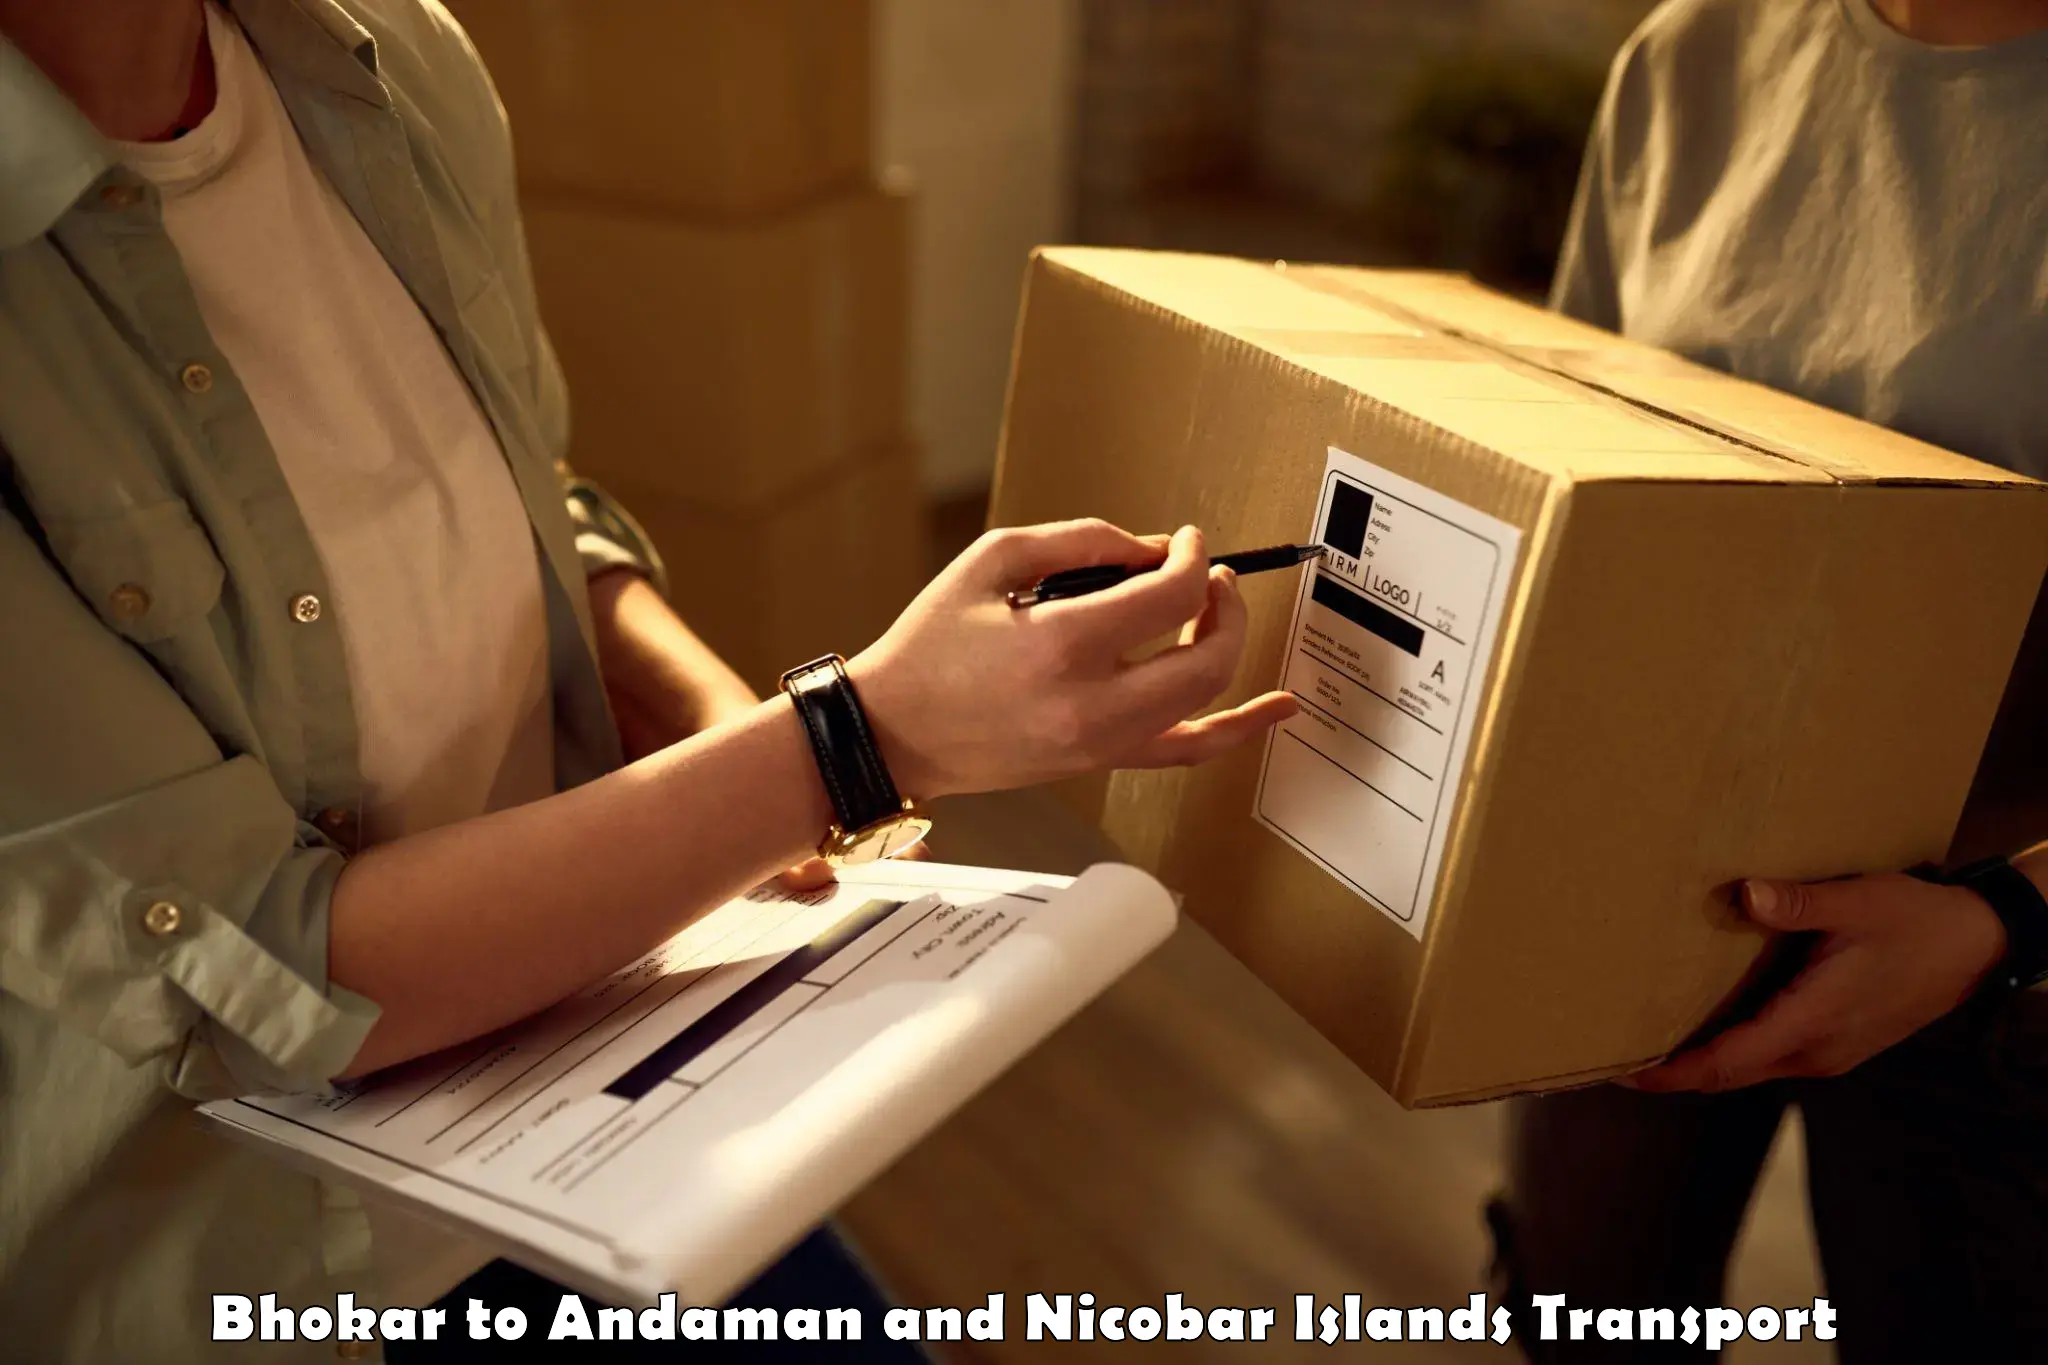 Express transport services in Bhokar to Andaman and Nicobar Islands